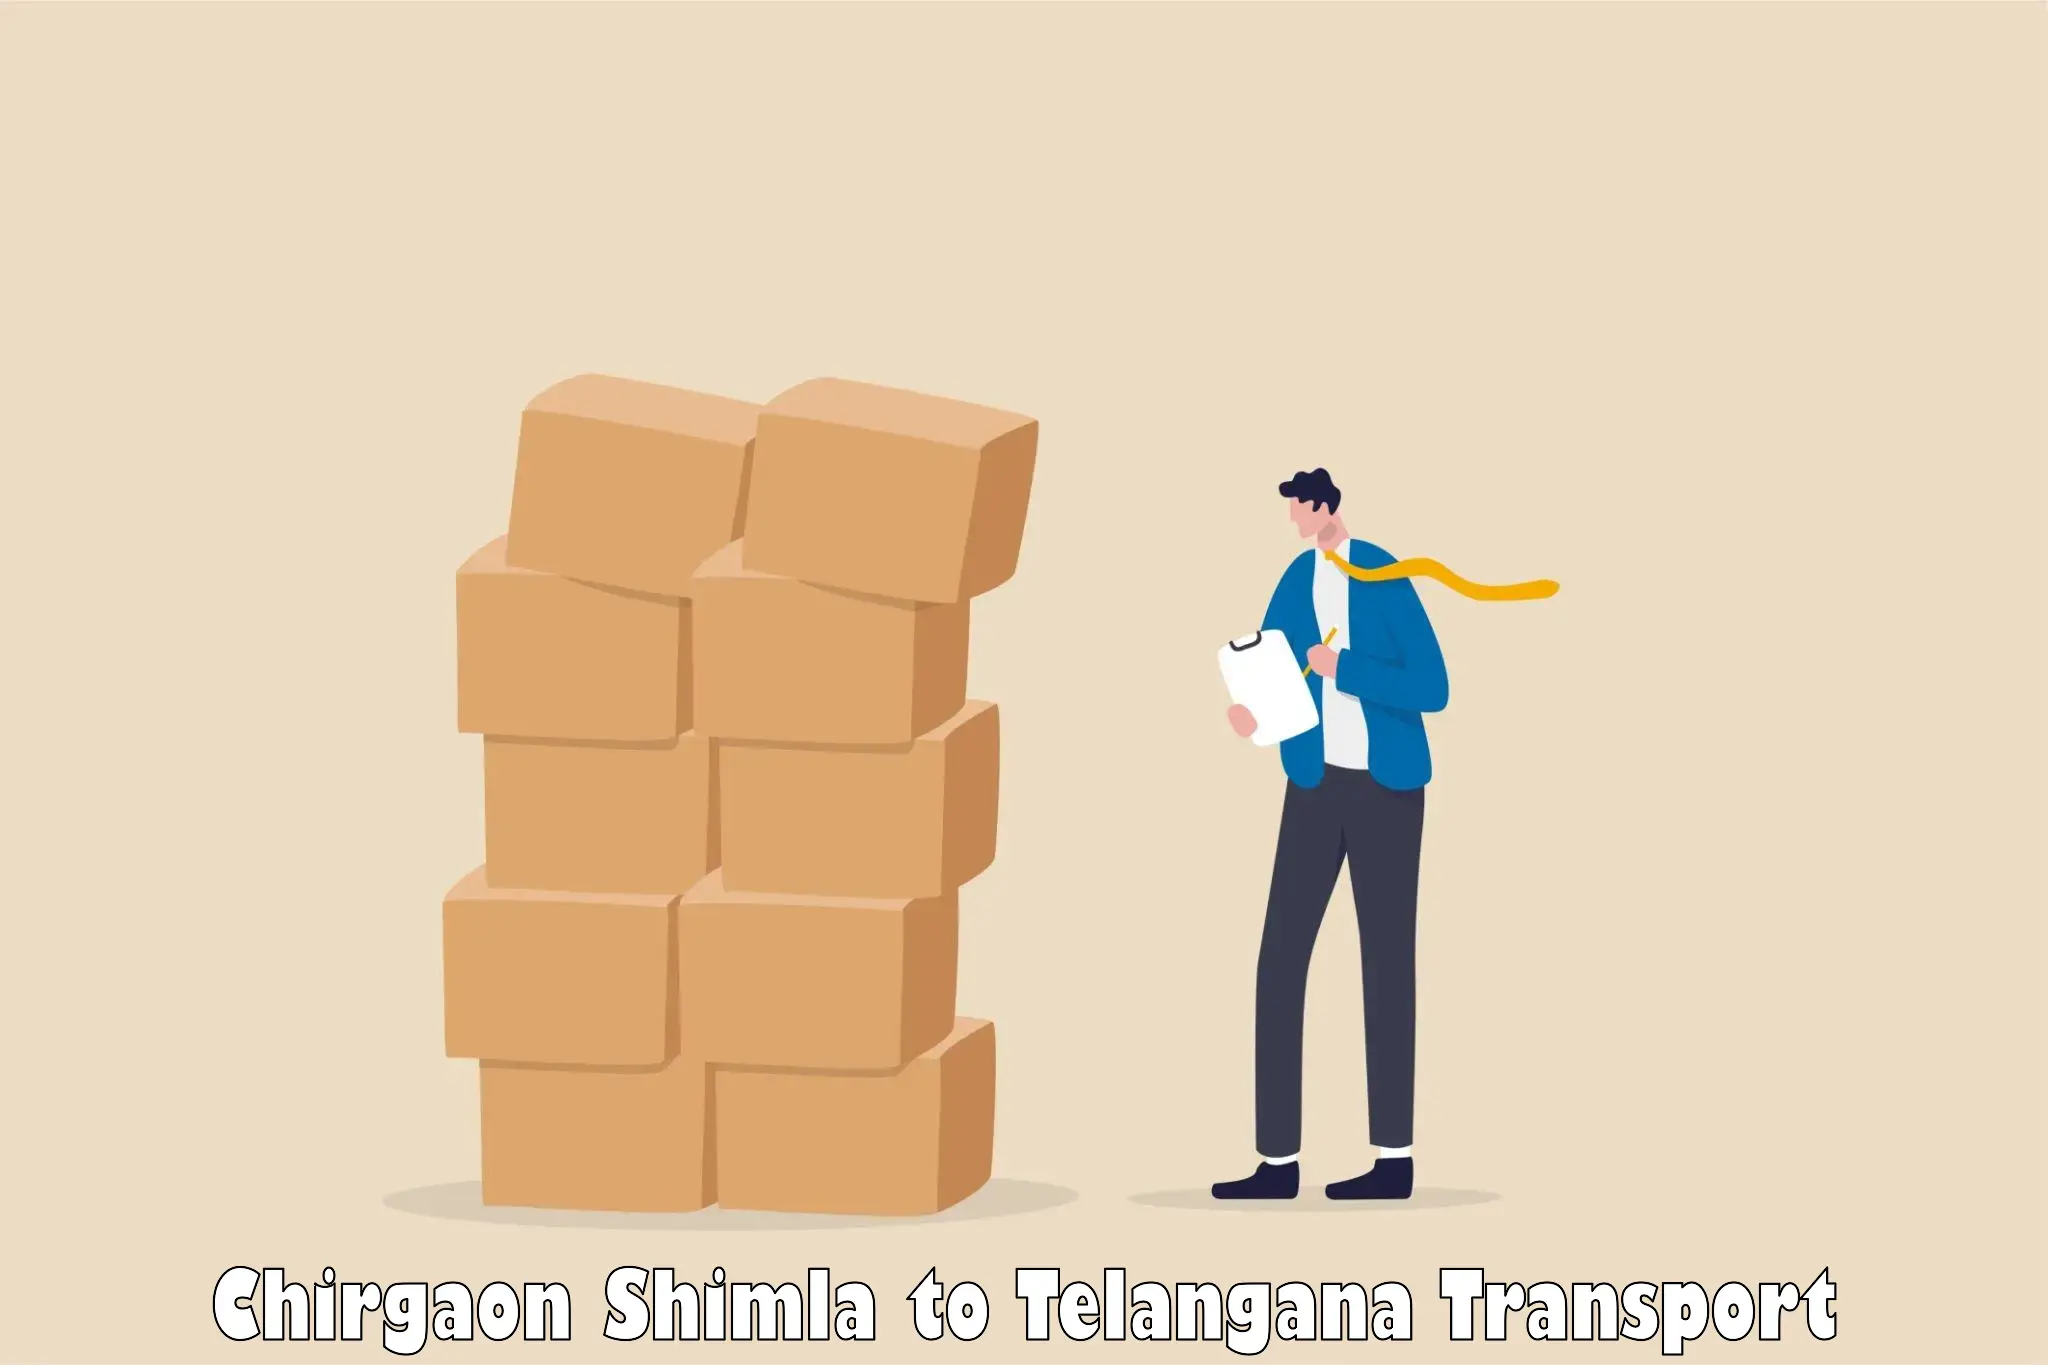 Container transport service Chirgaon Shimla to Mominpet